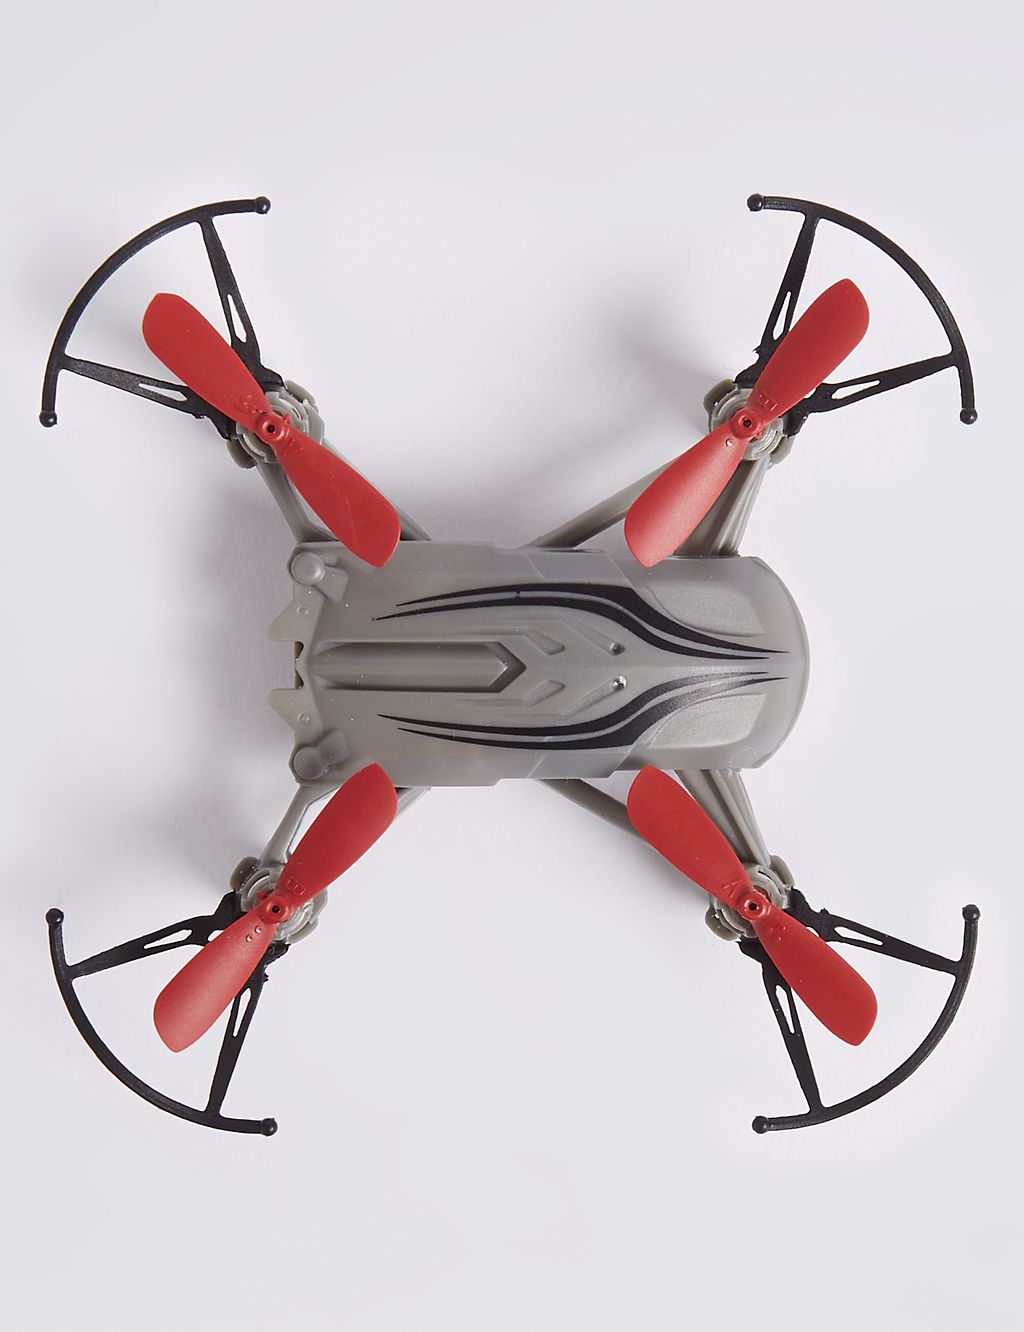 USB Drone 1 of 6